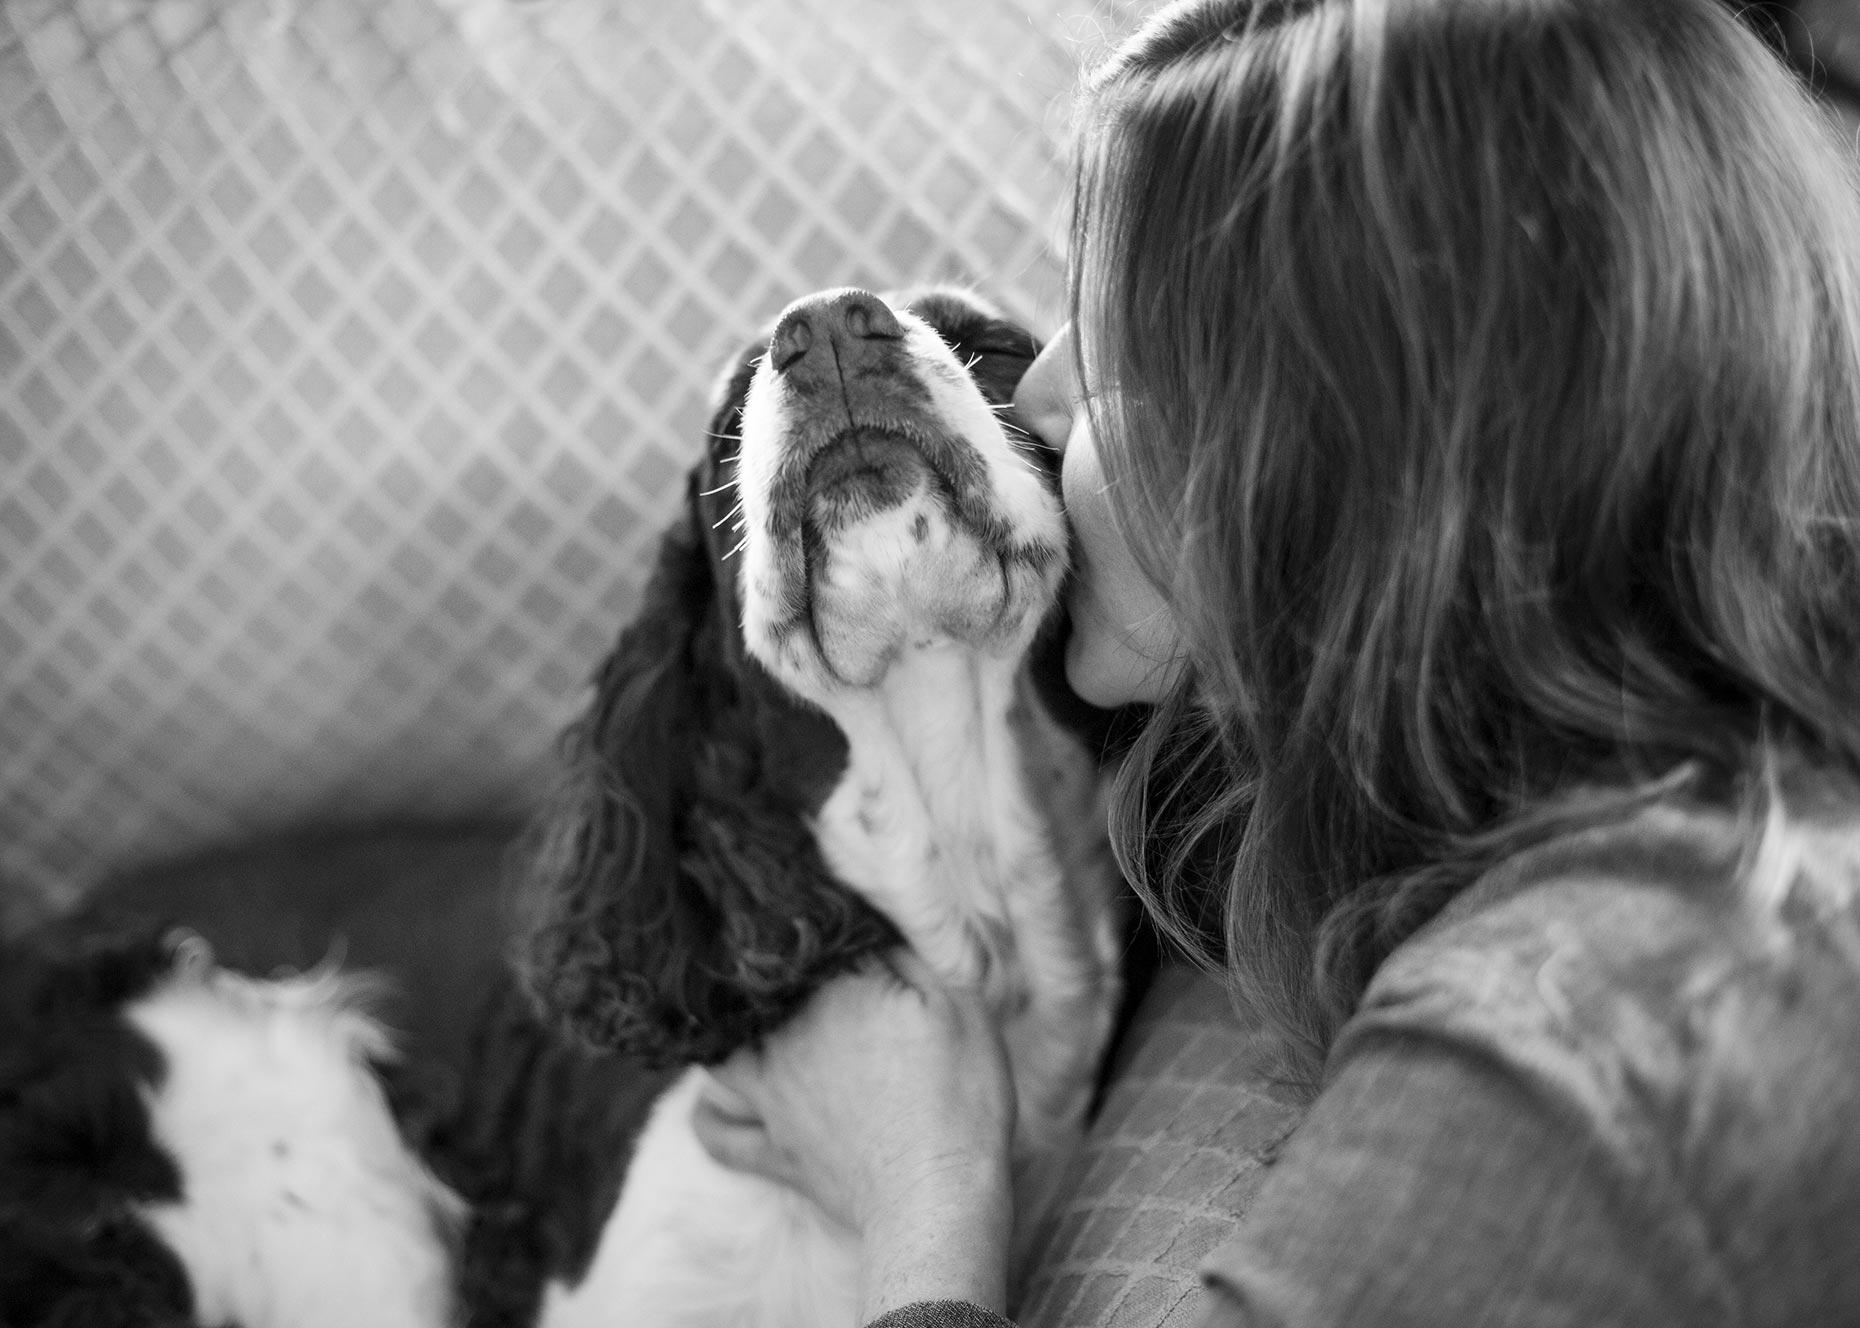 hbrownsphotography-lucy-kristin-hayes-springer-spaniel-web